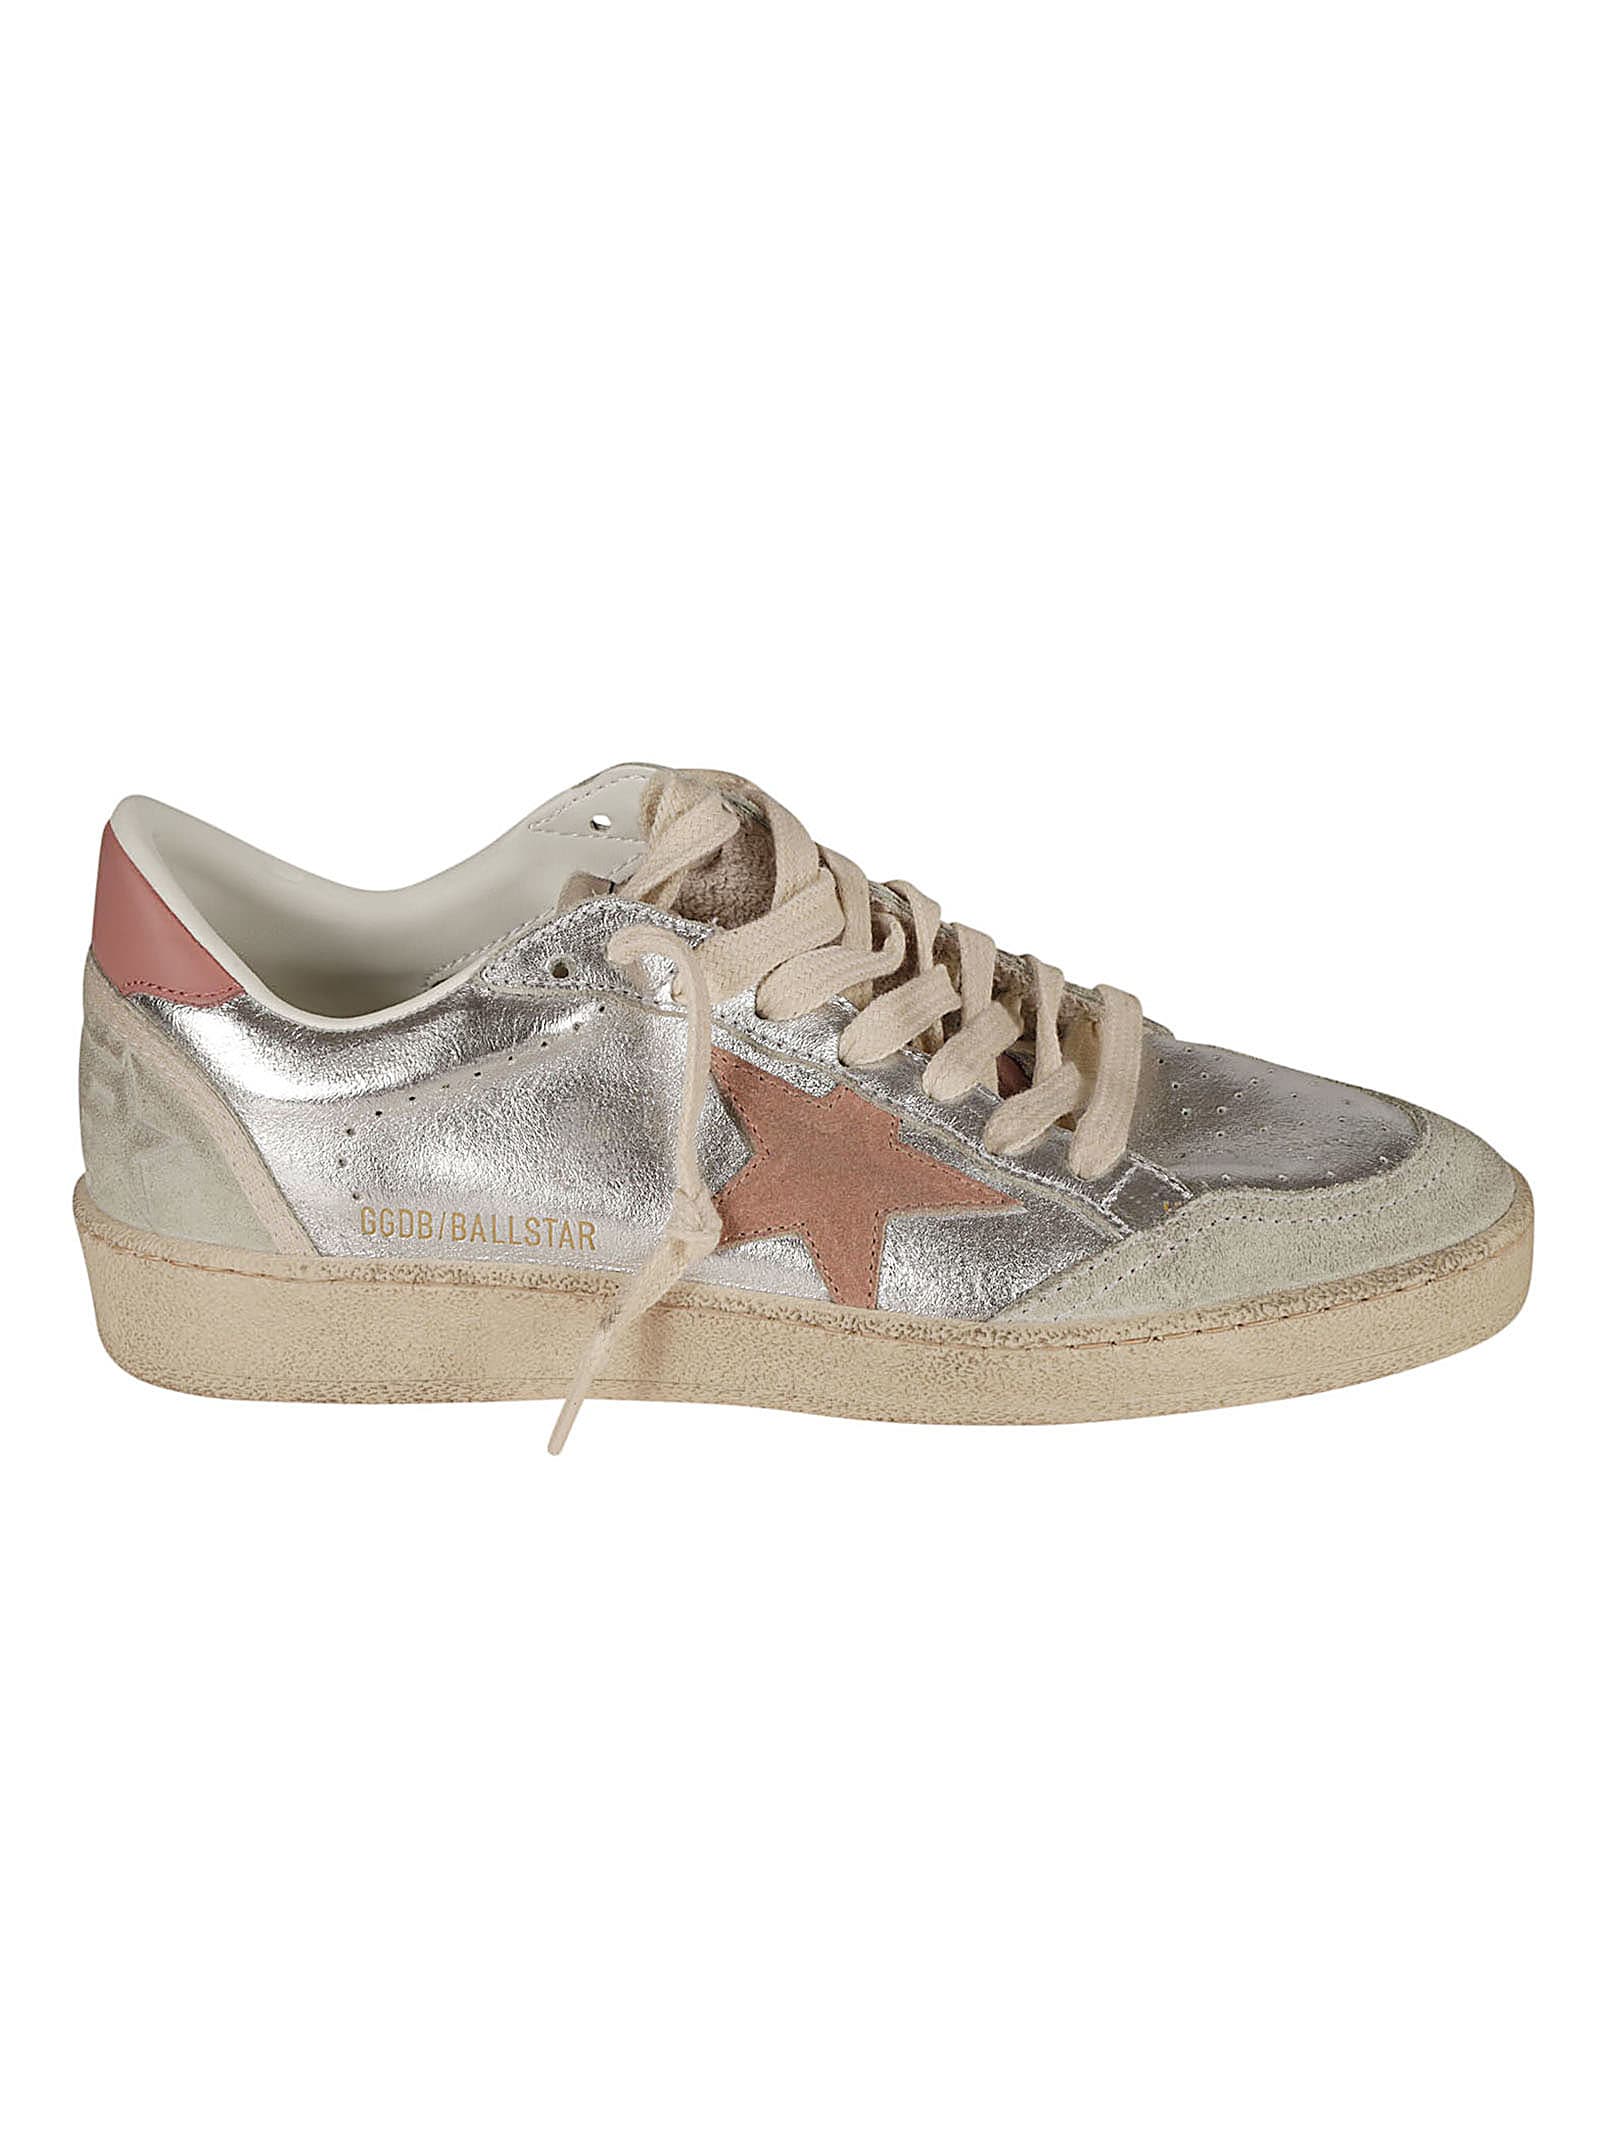 Golden Goose Ball Star Sneakers In Silver/ash Rose/ice